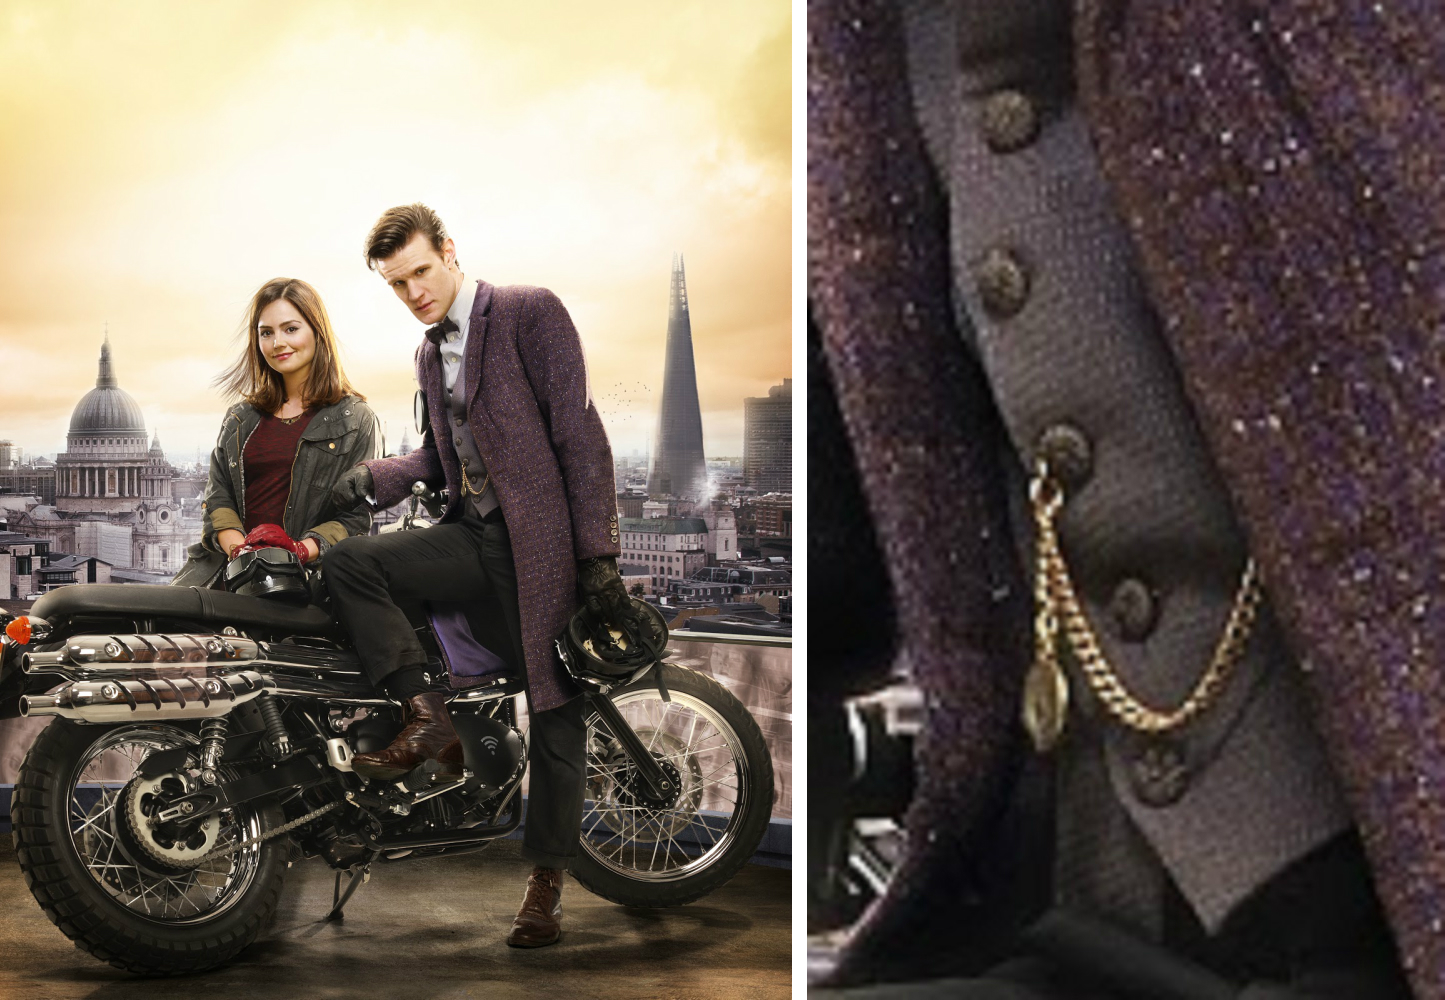 11th Doctor "scales" waistcoat fob chain